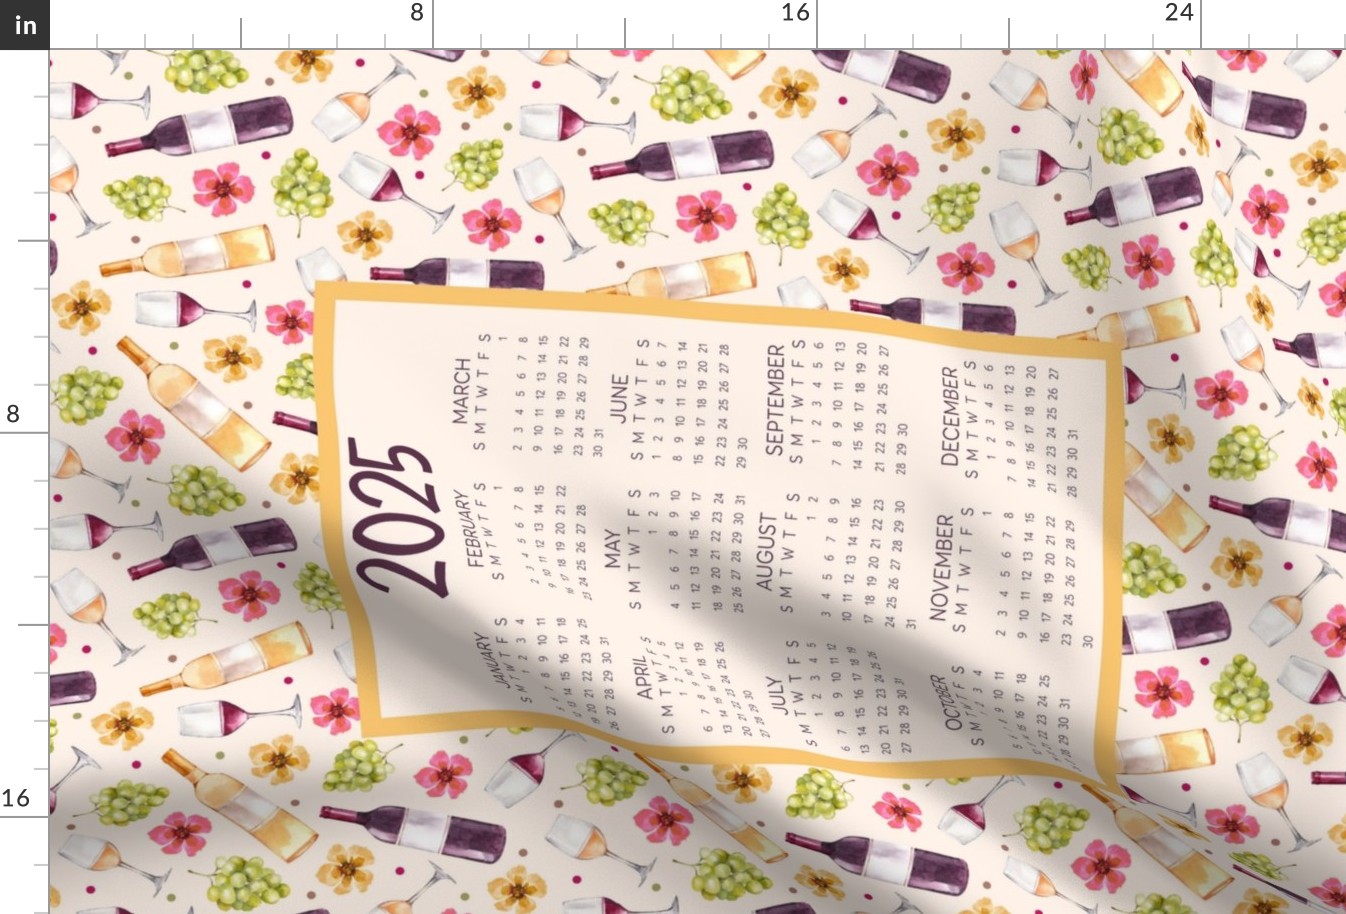 2025 Calendar Wall Hanging Fat Quarter Tea Towel Red and White Wine Bottles Glasses and Grapes